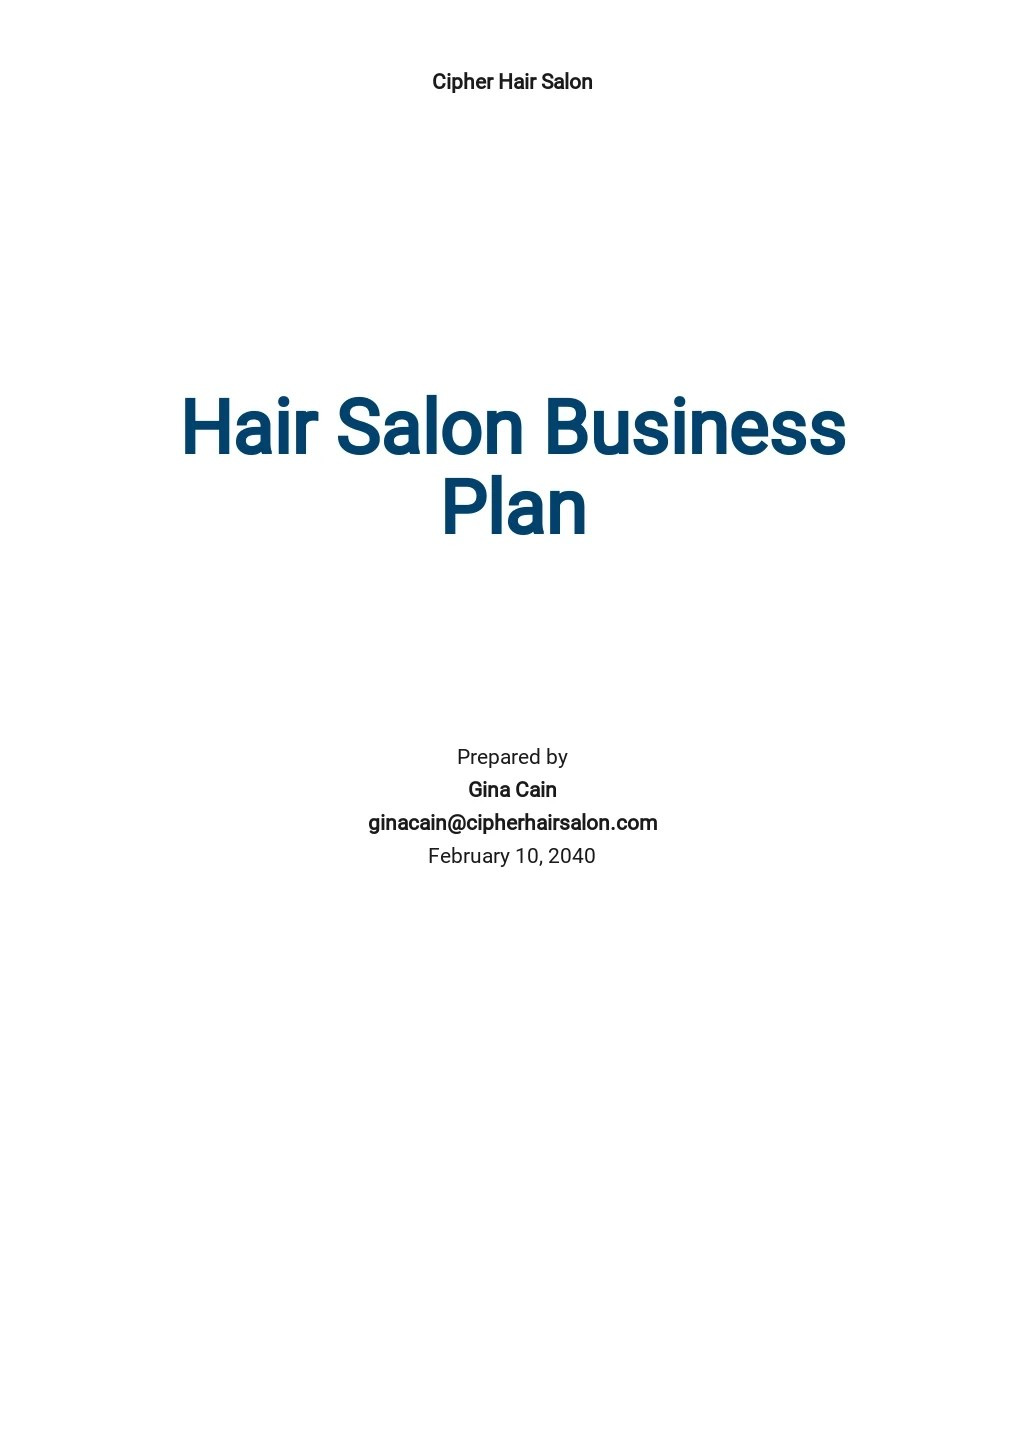 Hair Extension Business Plan Template in Google Docs, Word, Apple Pages